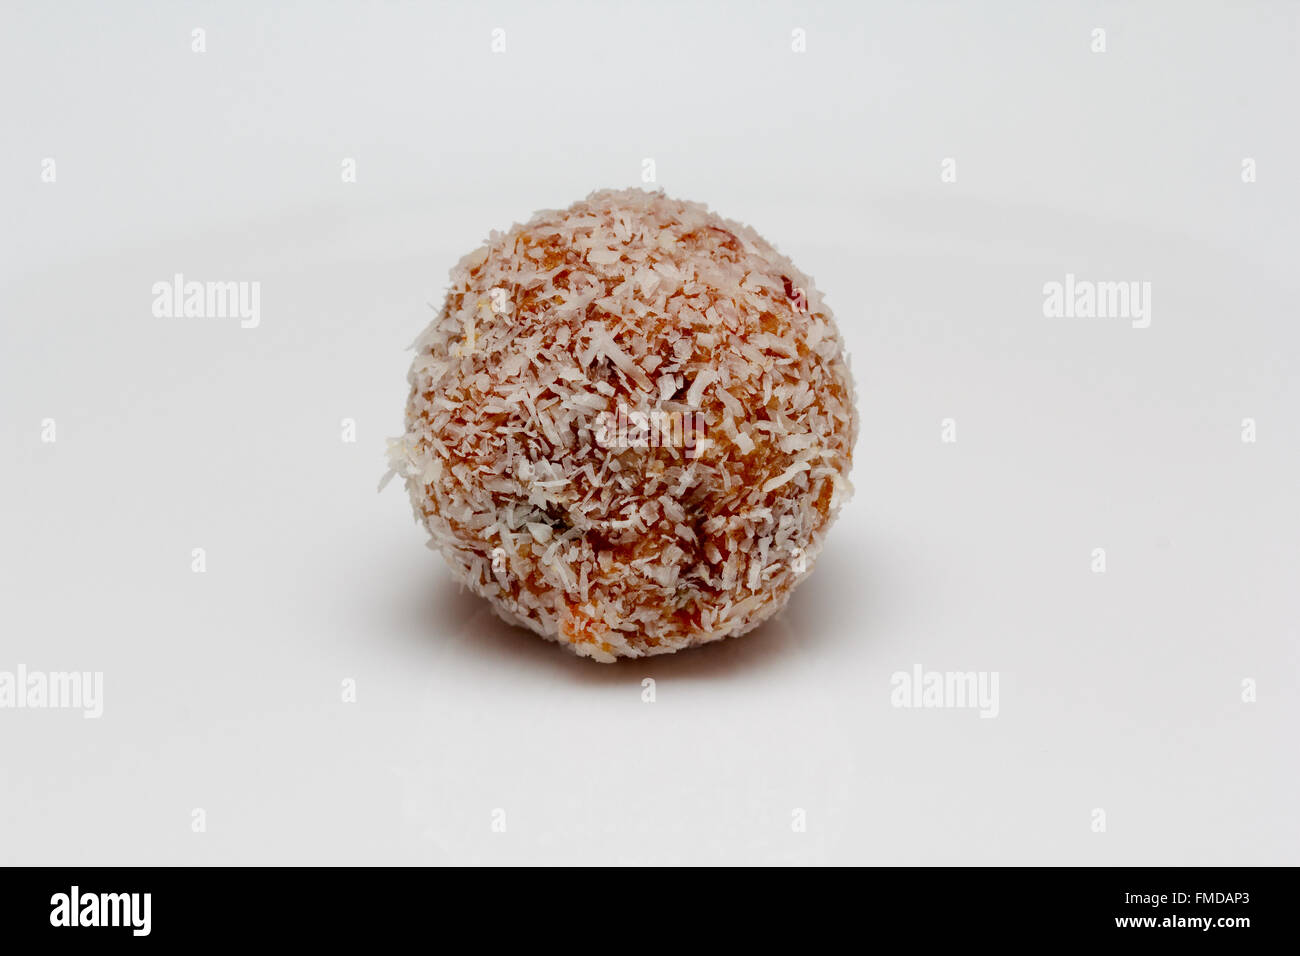 Super Fruit Healthy Nut And Dried Fruit Snack Ball With Coconut Stock Photo